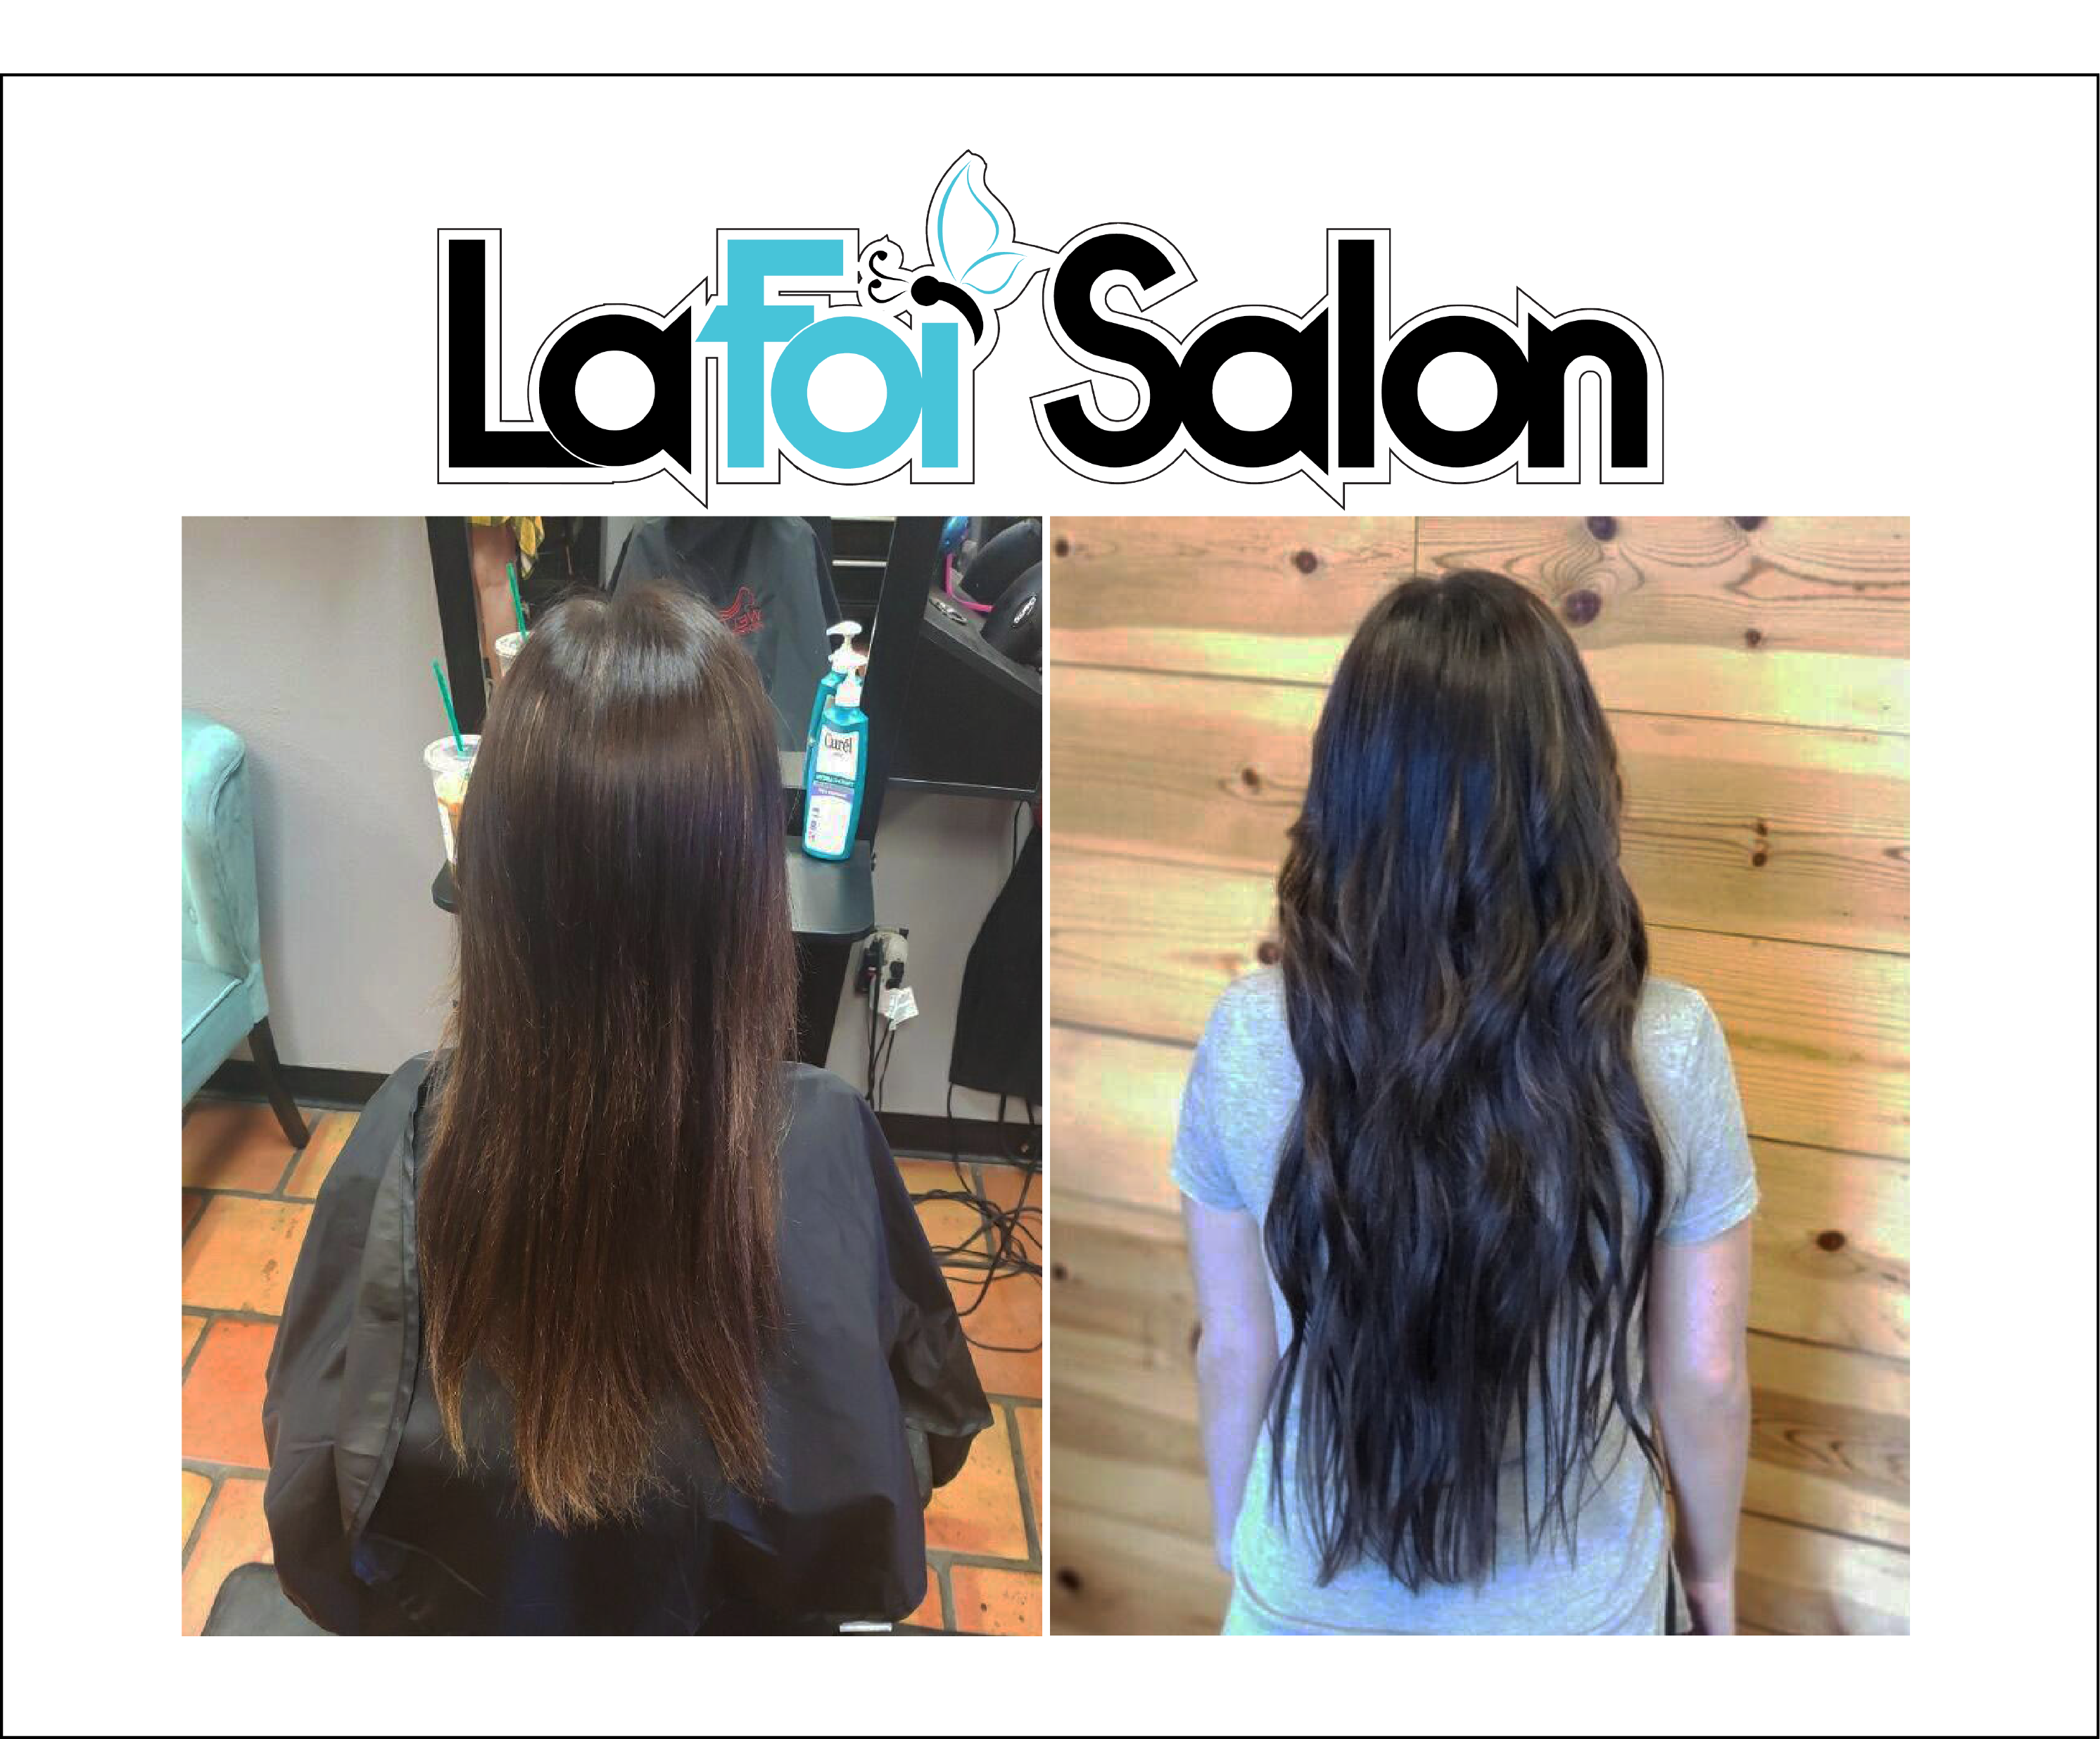 If you don't want to wait a year for your hair to grow, Give us a call today for your FREE Consultation!! (806)771-4545 www.lafoisalon.com